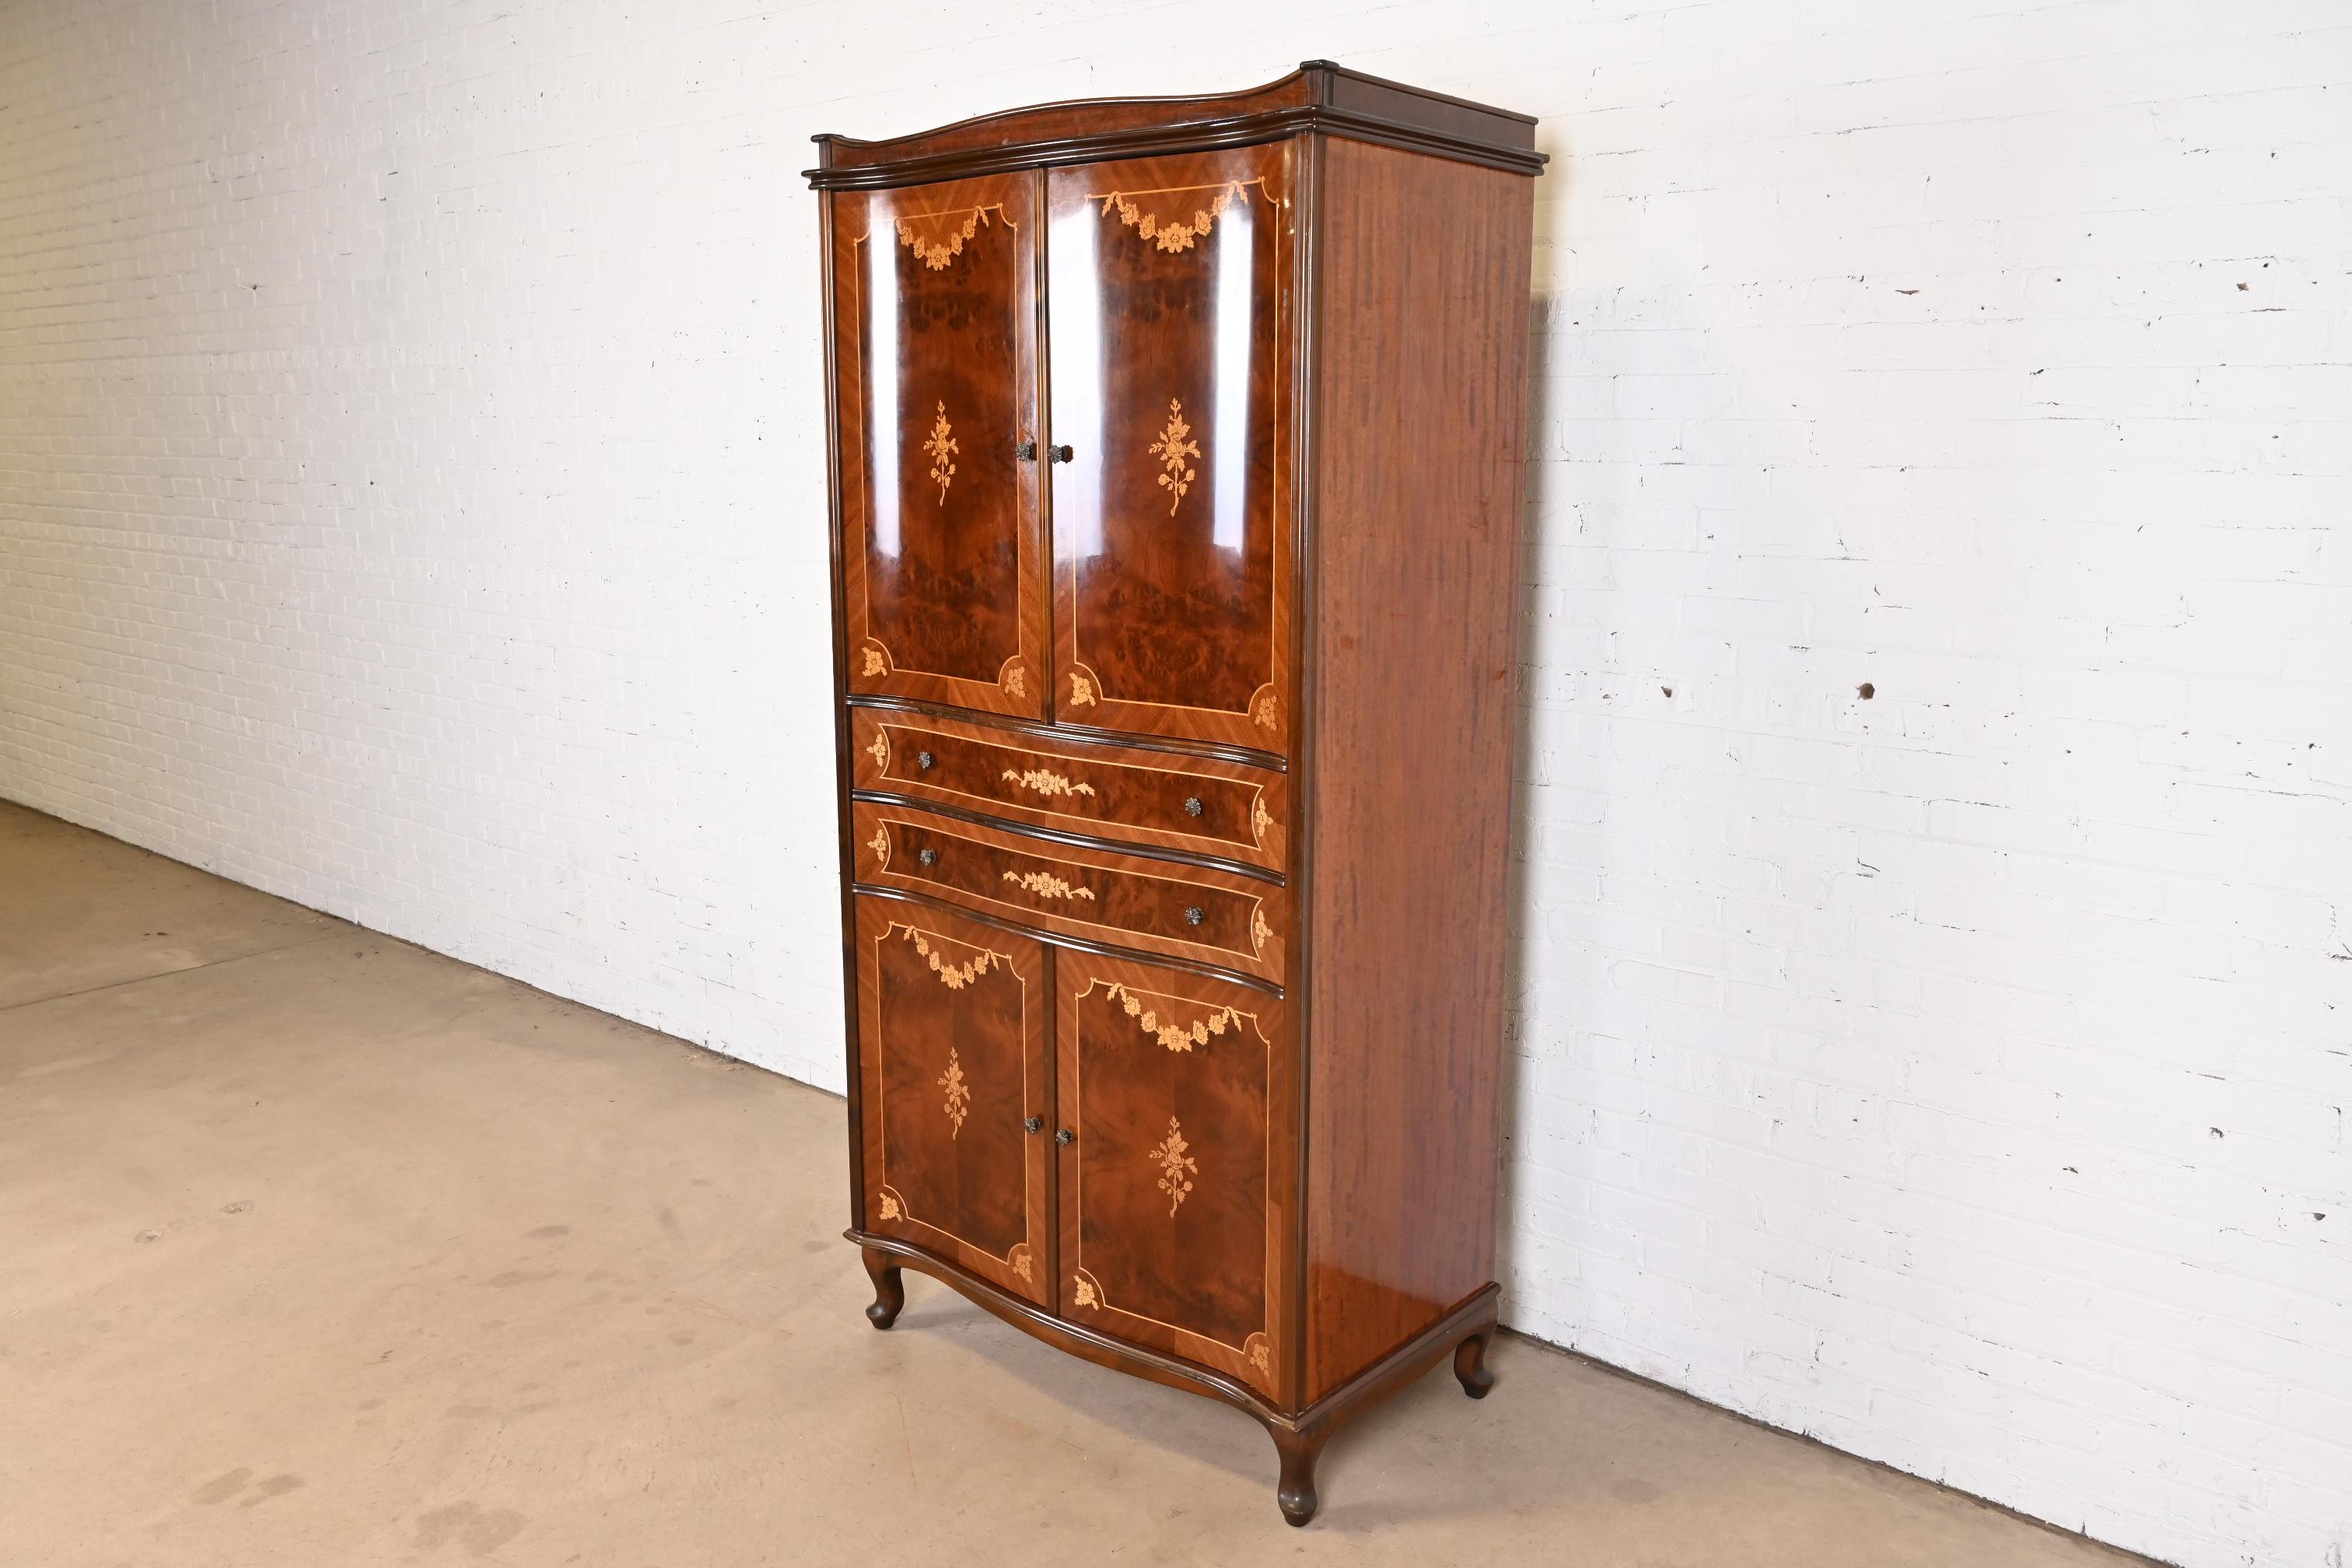 French Provincial Jules Leleu Style French Continental Inlaid Burled Mahogany Armoire Dresser